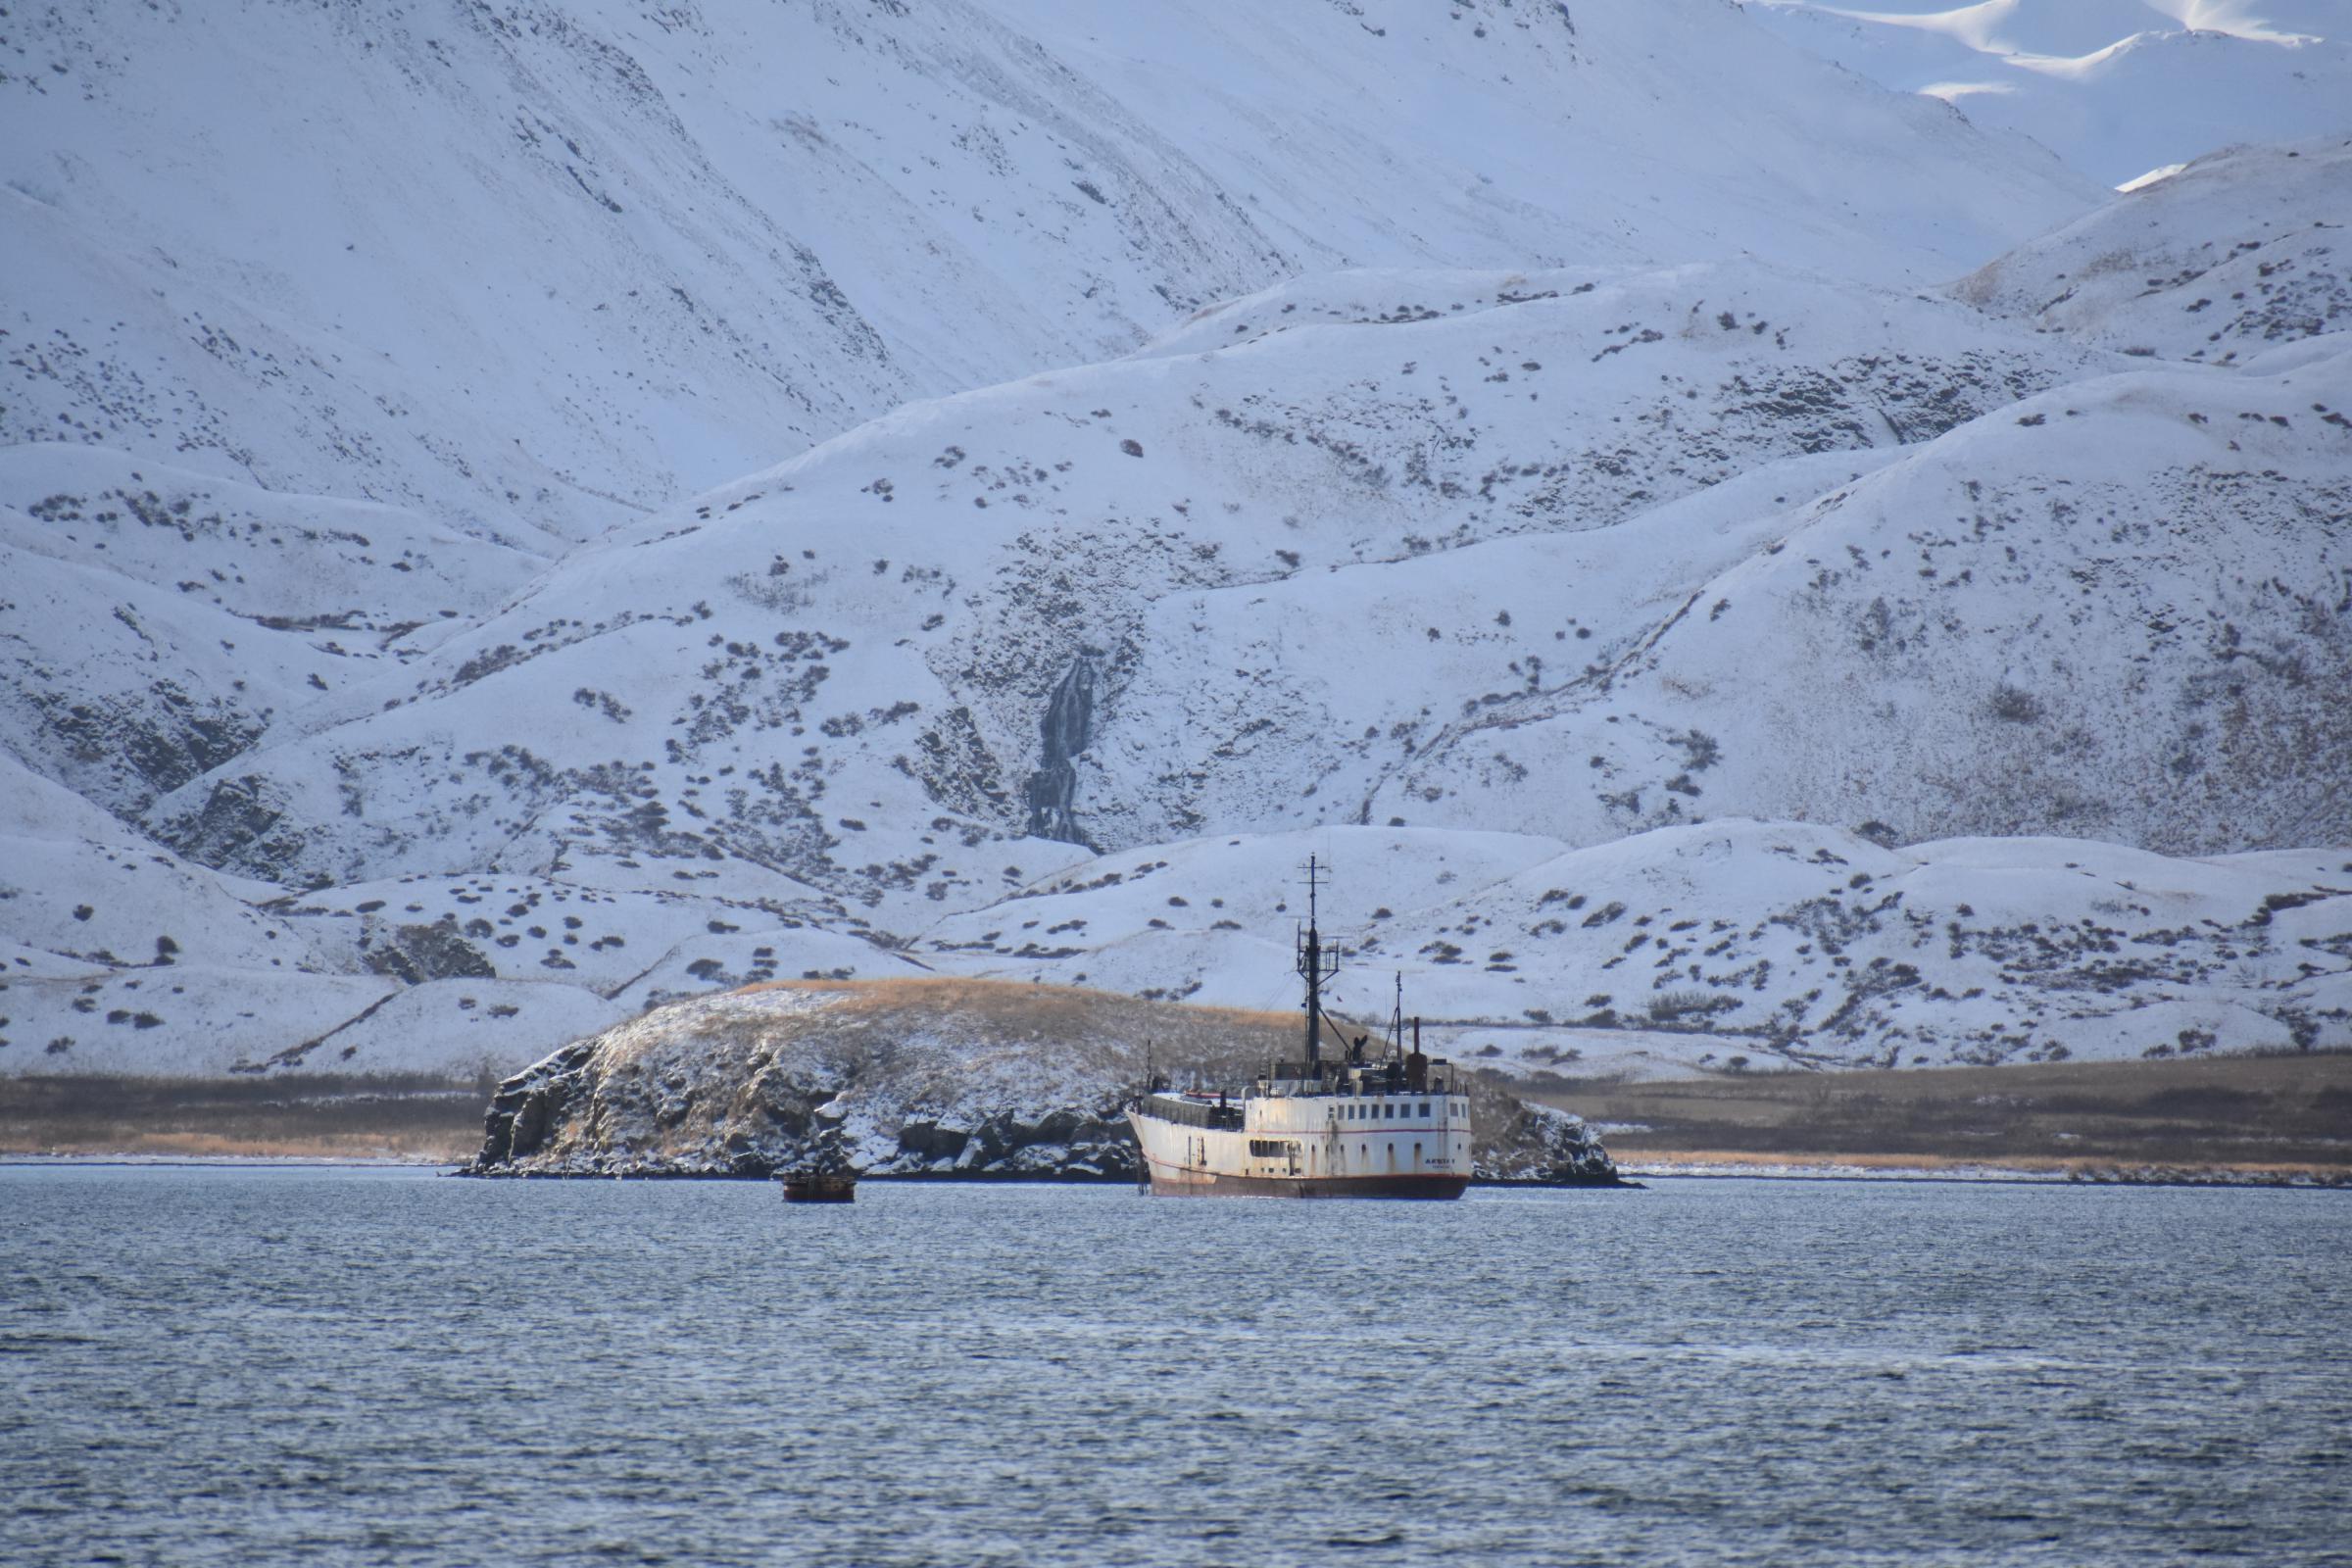 The F/V Akutan has been moored in Unalaska’s Captains Bay since August. (Photo by Zoe Sobel/KUCB)